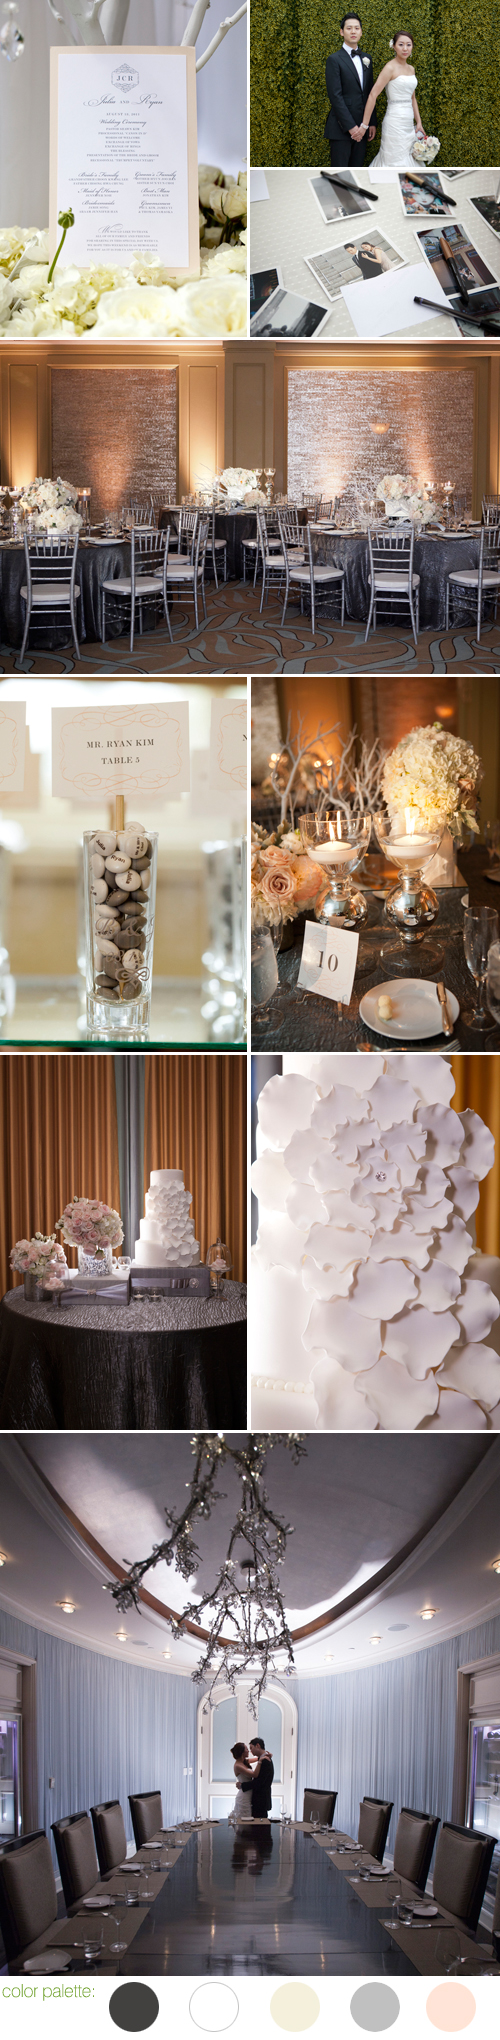 charcoal gray, silver, white and peach oceanside wedding at The Ritz-Carlton Laguna Niguel Dana Point, CA, planned by Details, Details and photographed by Roberto Valenzuela Photography